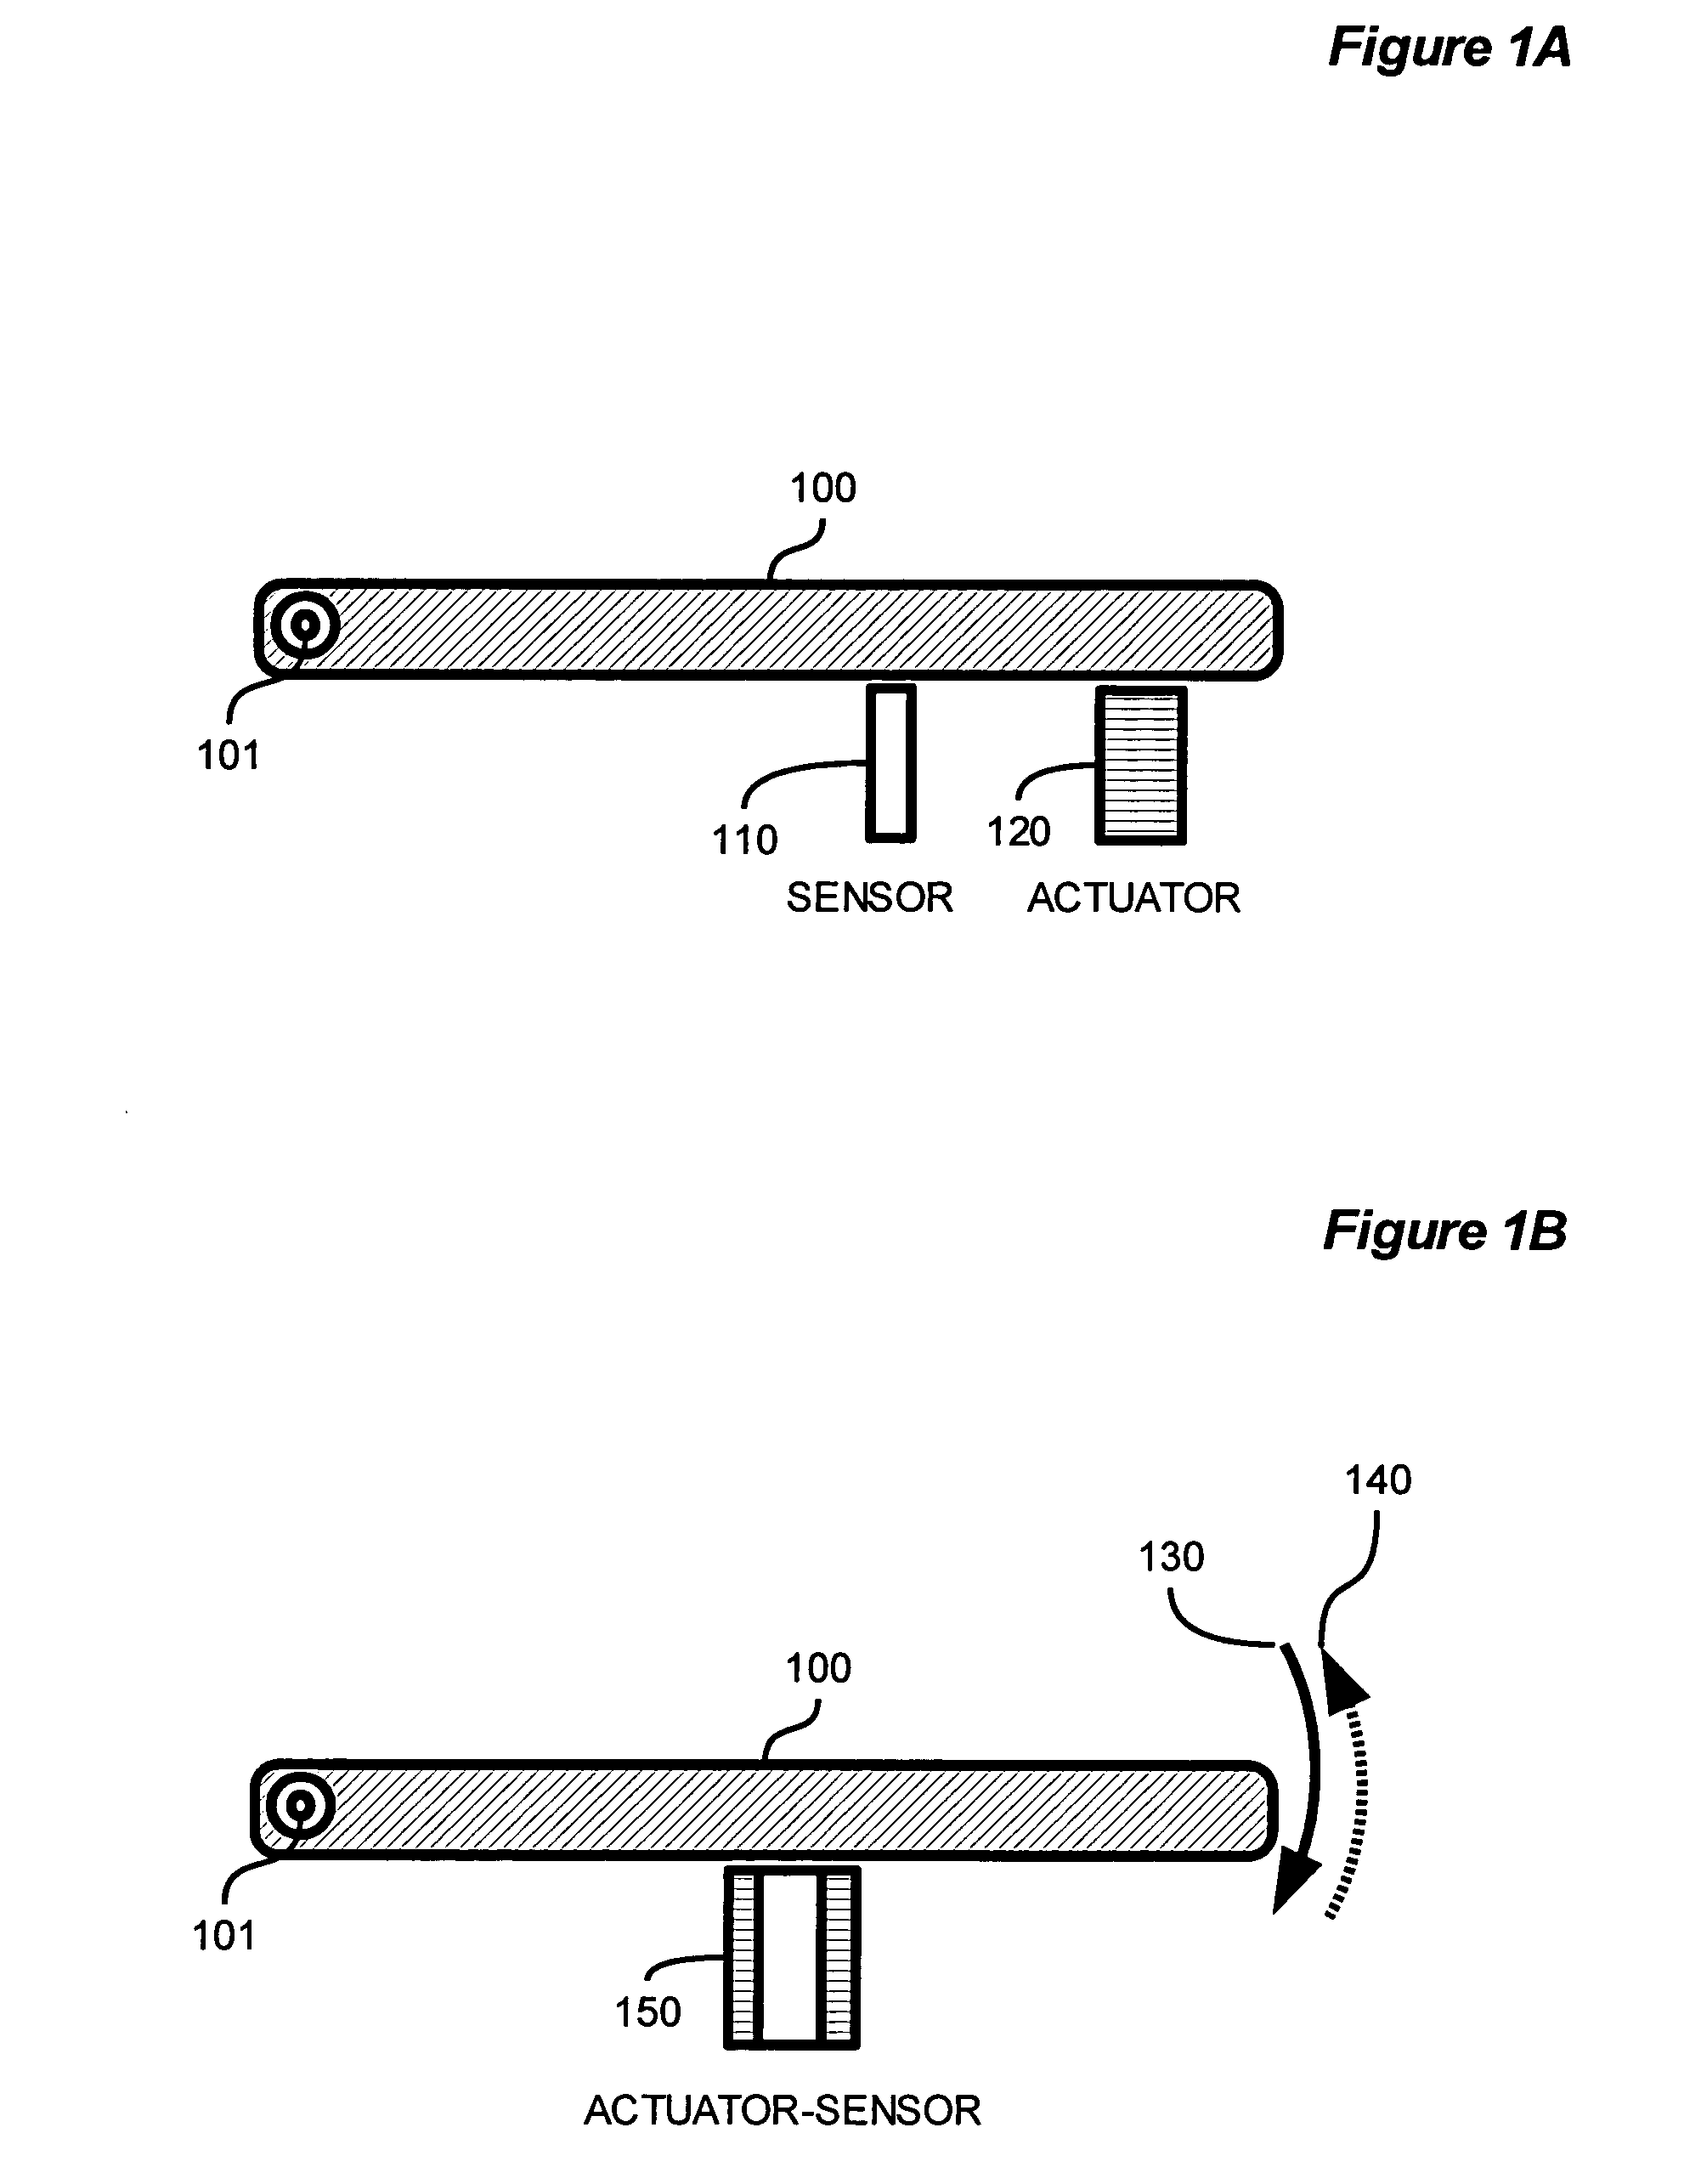 Method and apparatus for simulating a mechanical keyboard action in an electronic keyboard